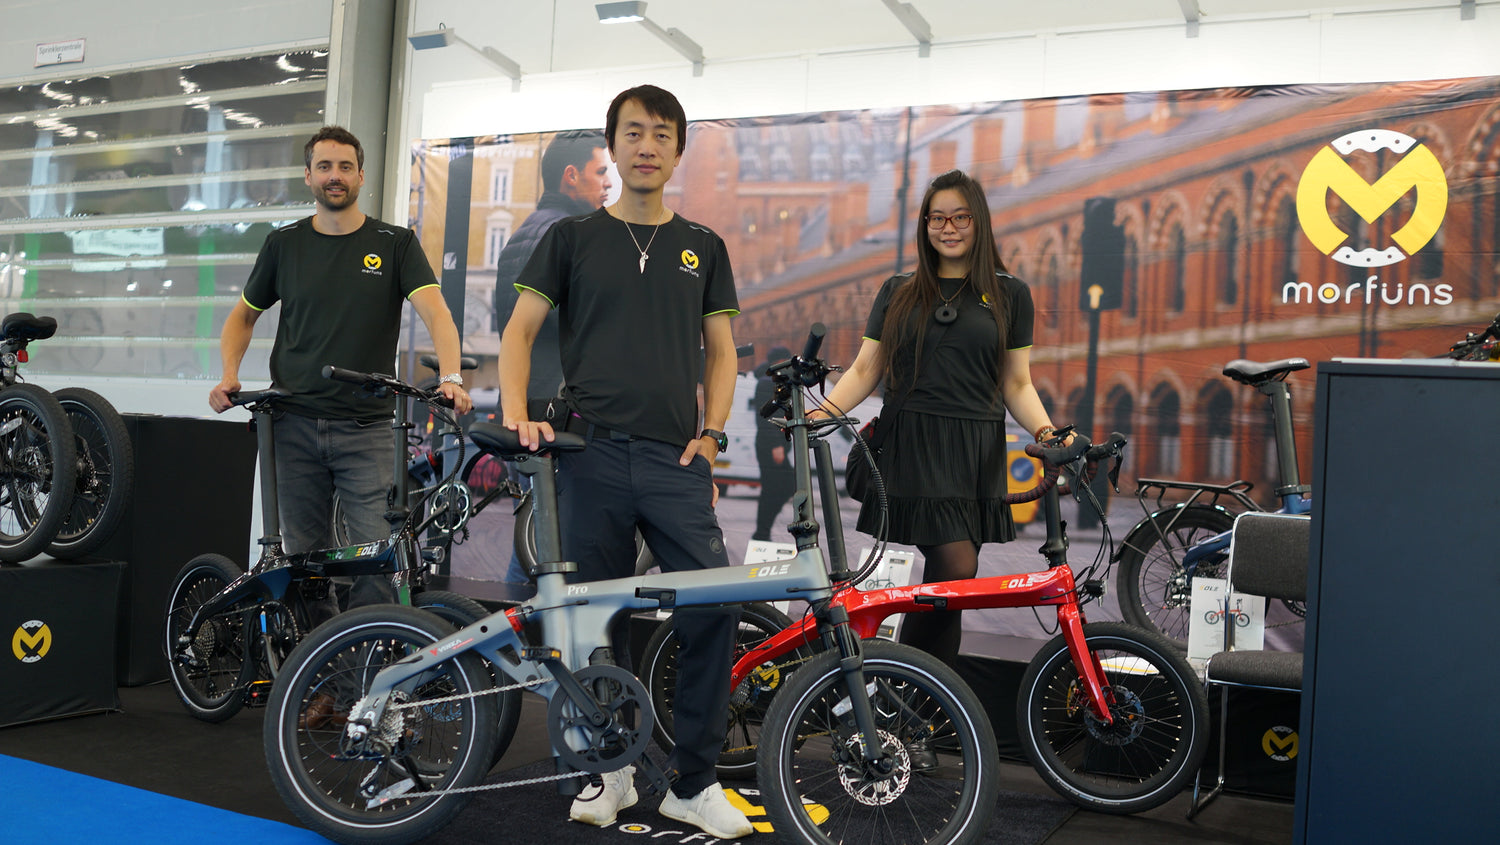 Meet the Unitrax team holding on to the Morfuns Ebikes inlcuding Eole X and Eole S